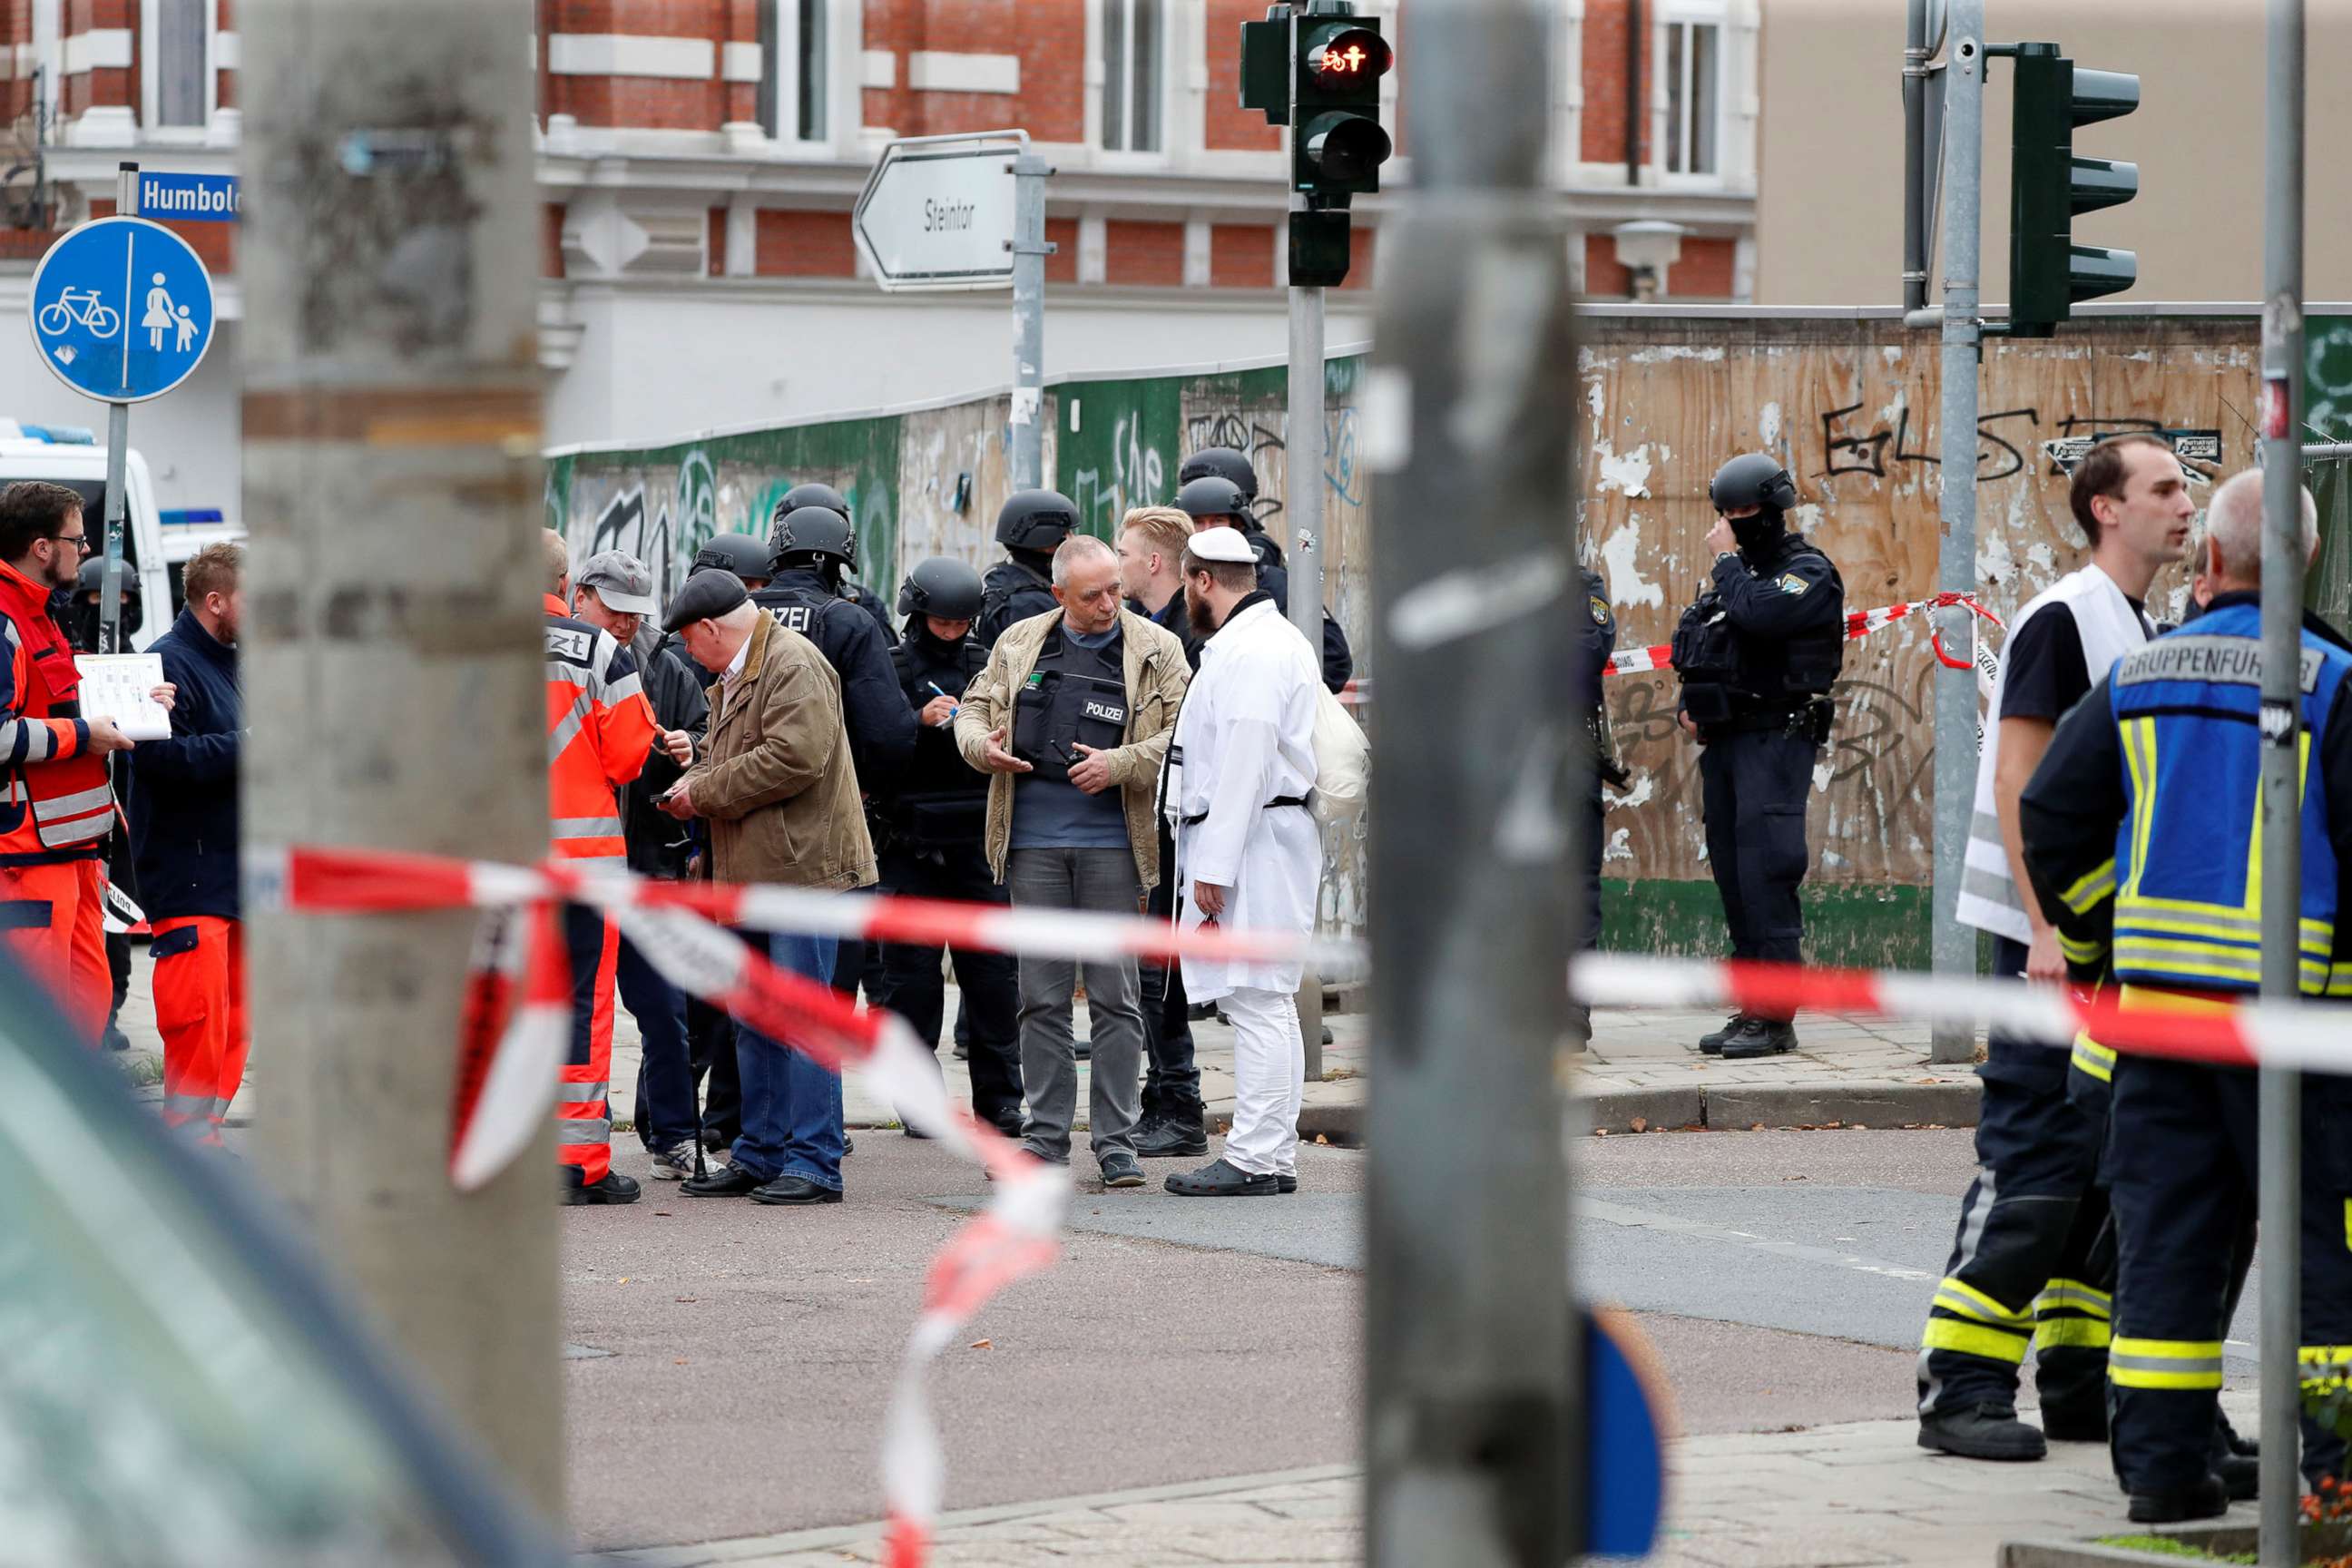 PHOTO: A police officer speaks with a Jewish man near the site of a shooting, in which two people were killed, in Halle, Germany, Oct. 9, 2019.